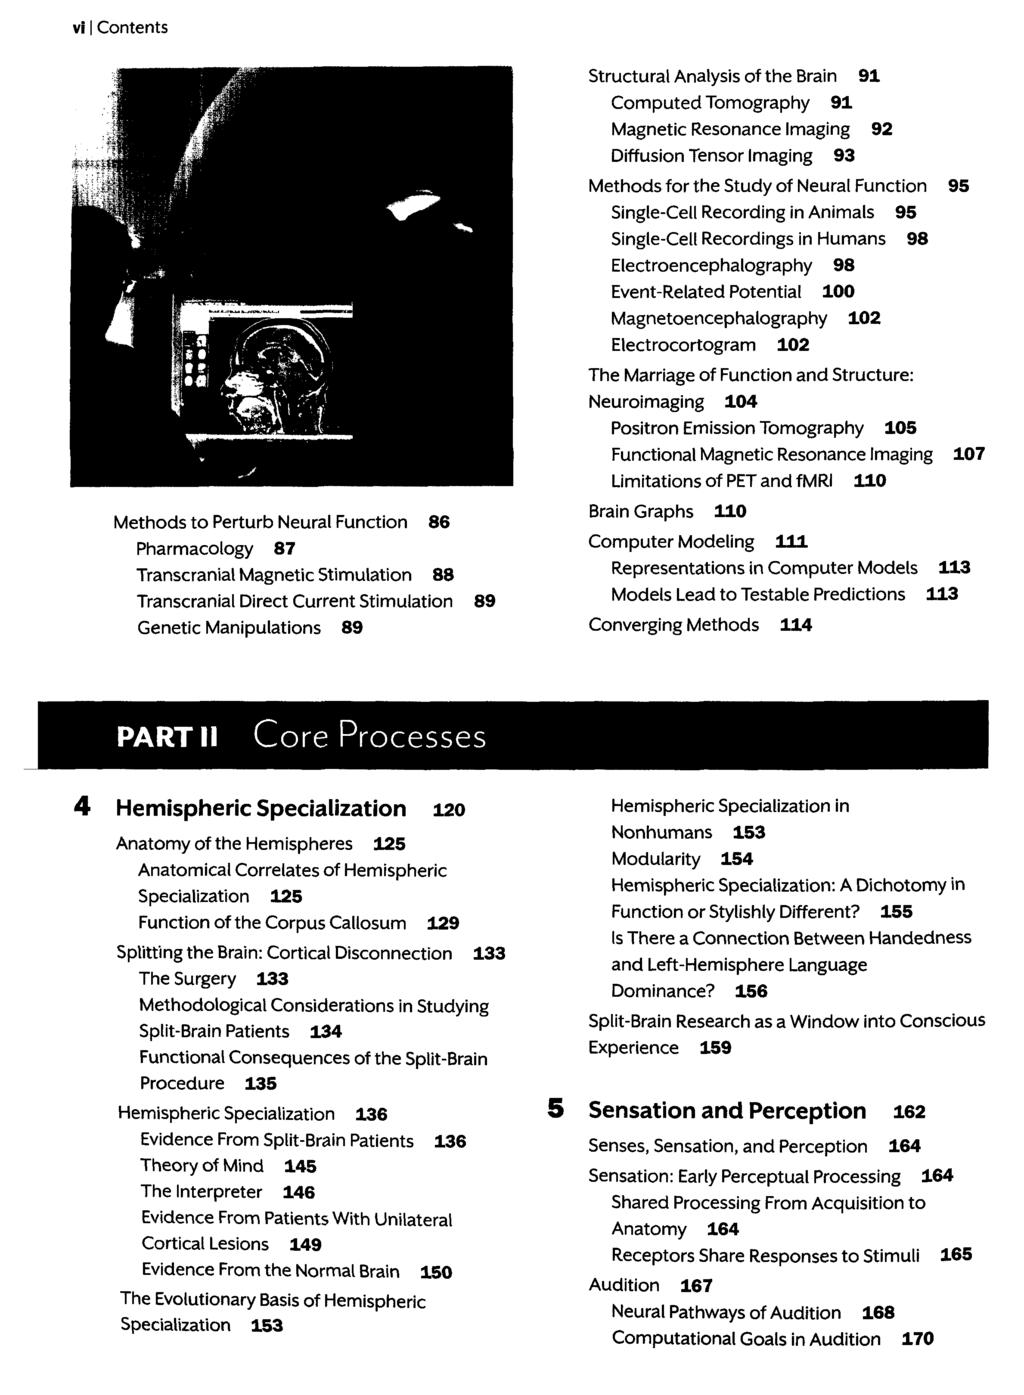 vi I Contents Methods to Perturb Neural Function 86 Pharmacology 87 Transcranial Magnetic Stimulation 88 Transcranial Direct Current Stimulation 89 Genetic Manipulations 89 Structural Analysis of the